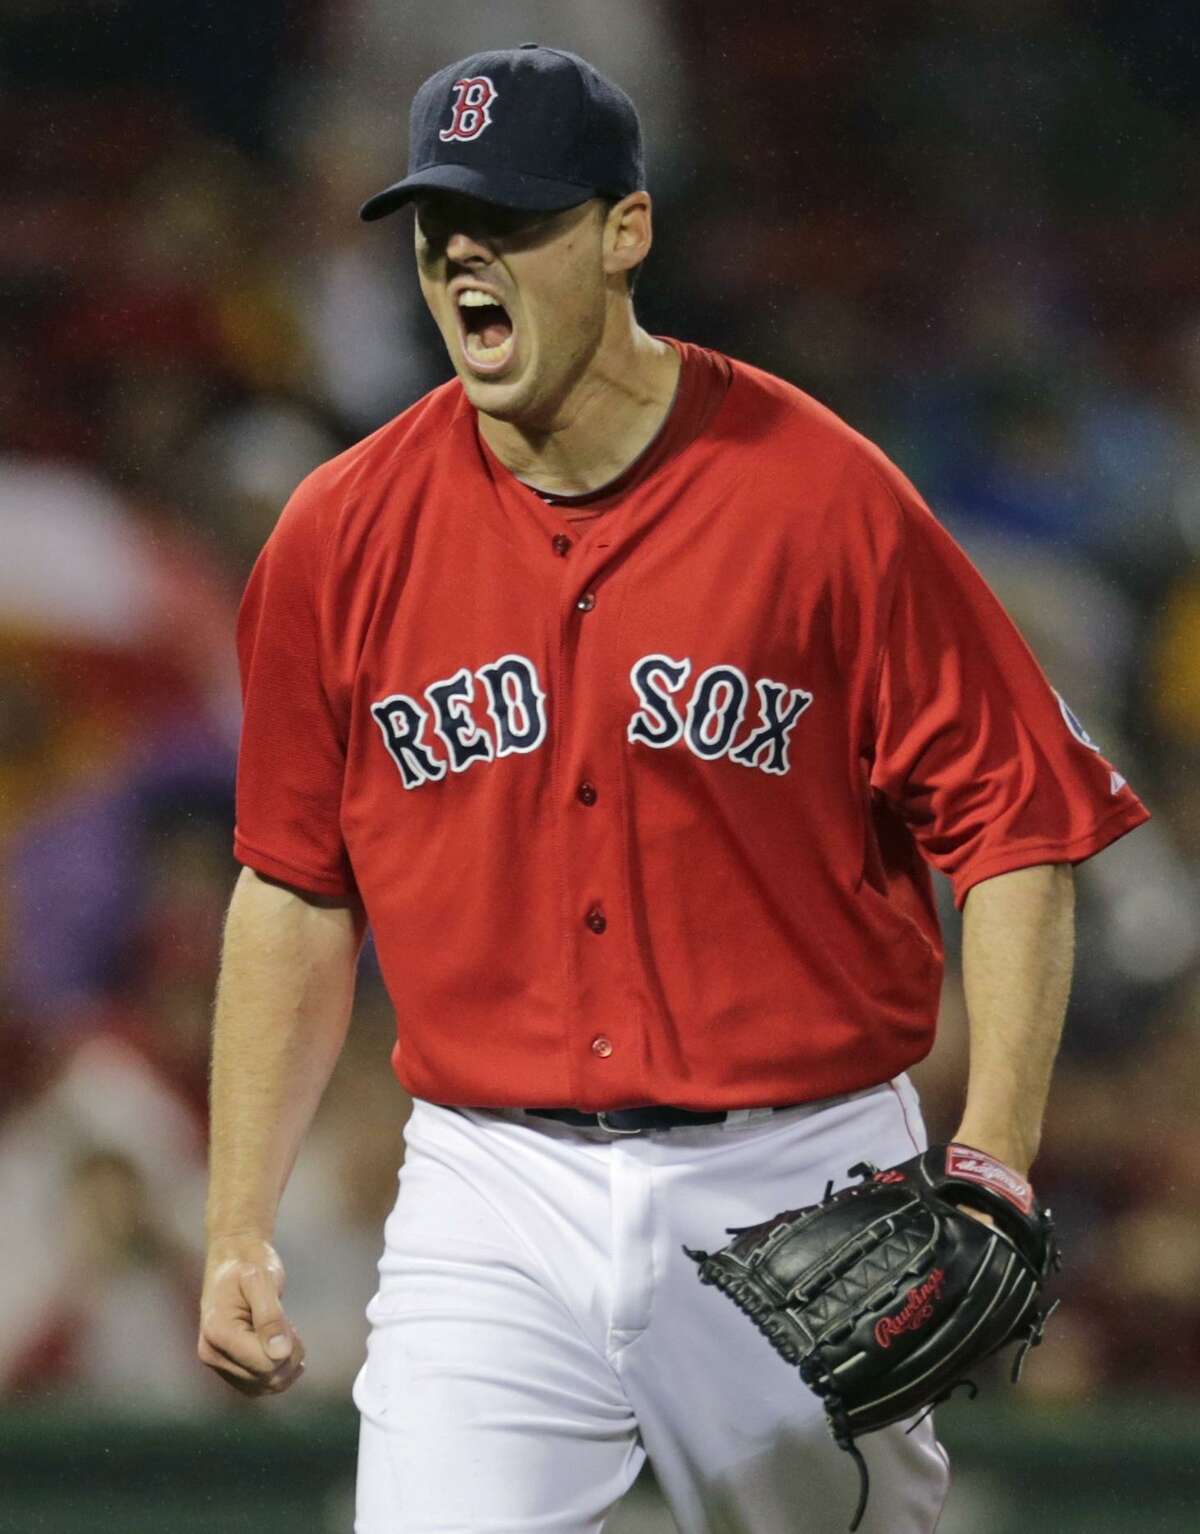 Boston Red Sox starting pitcher John Lackey yells after striking out Cleveland Indians' Nick Swisher to end the top of the sixth inning of a baseball game at Fenway Park in Boston, Friday, May 24, 2013. (AP Photo/Charles Krupa)